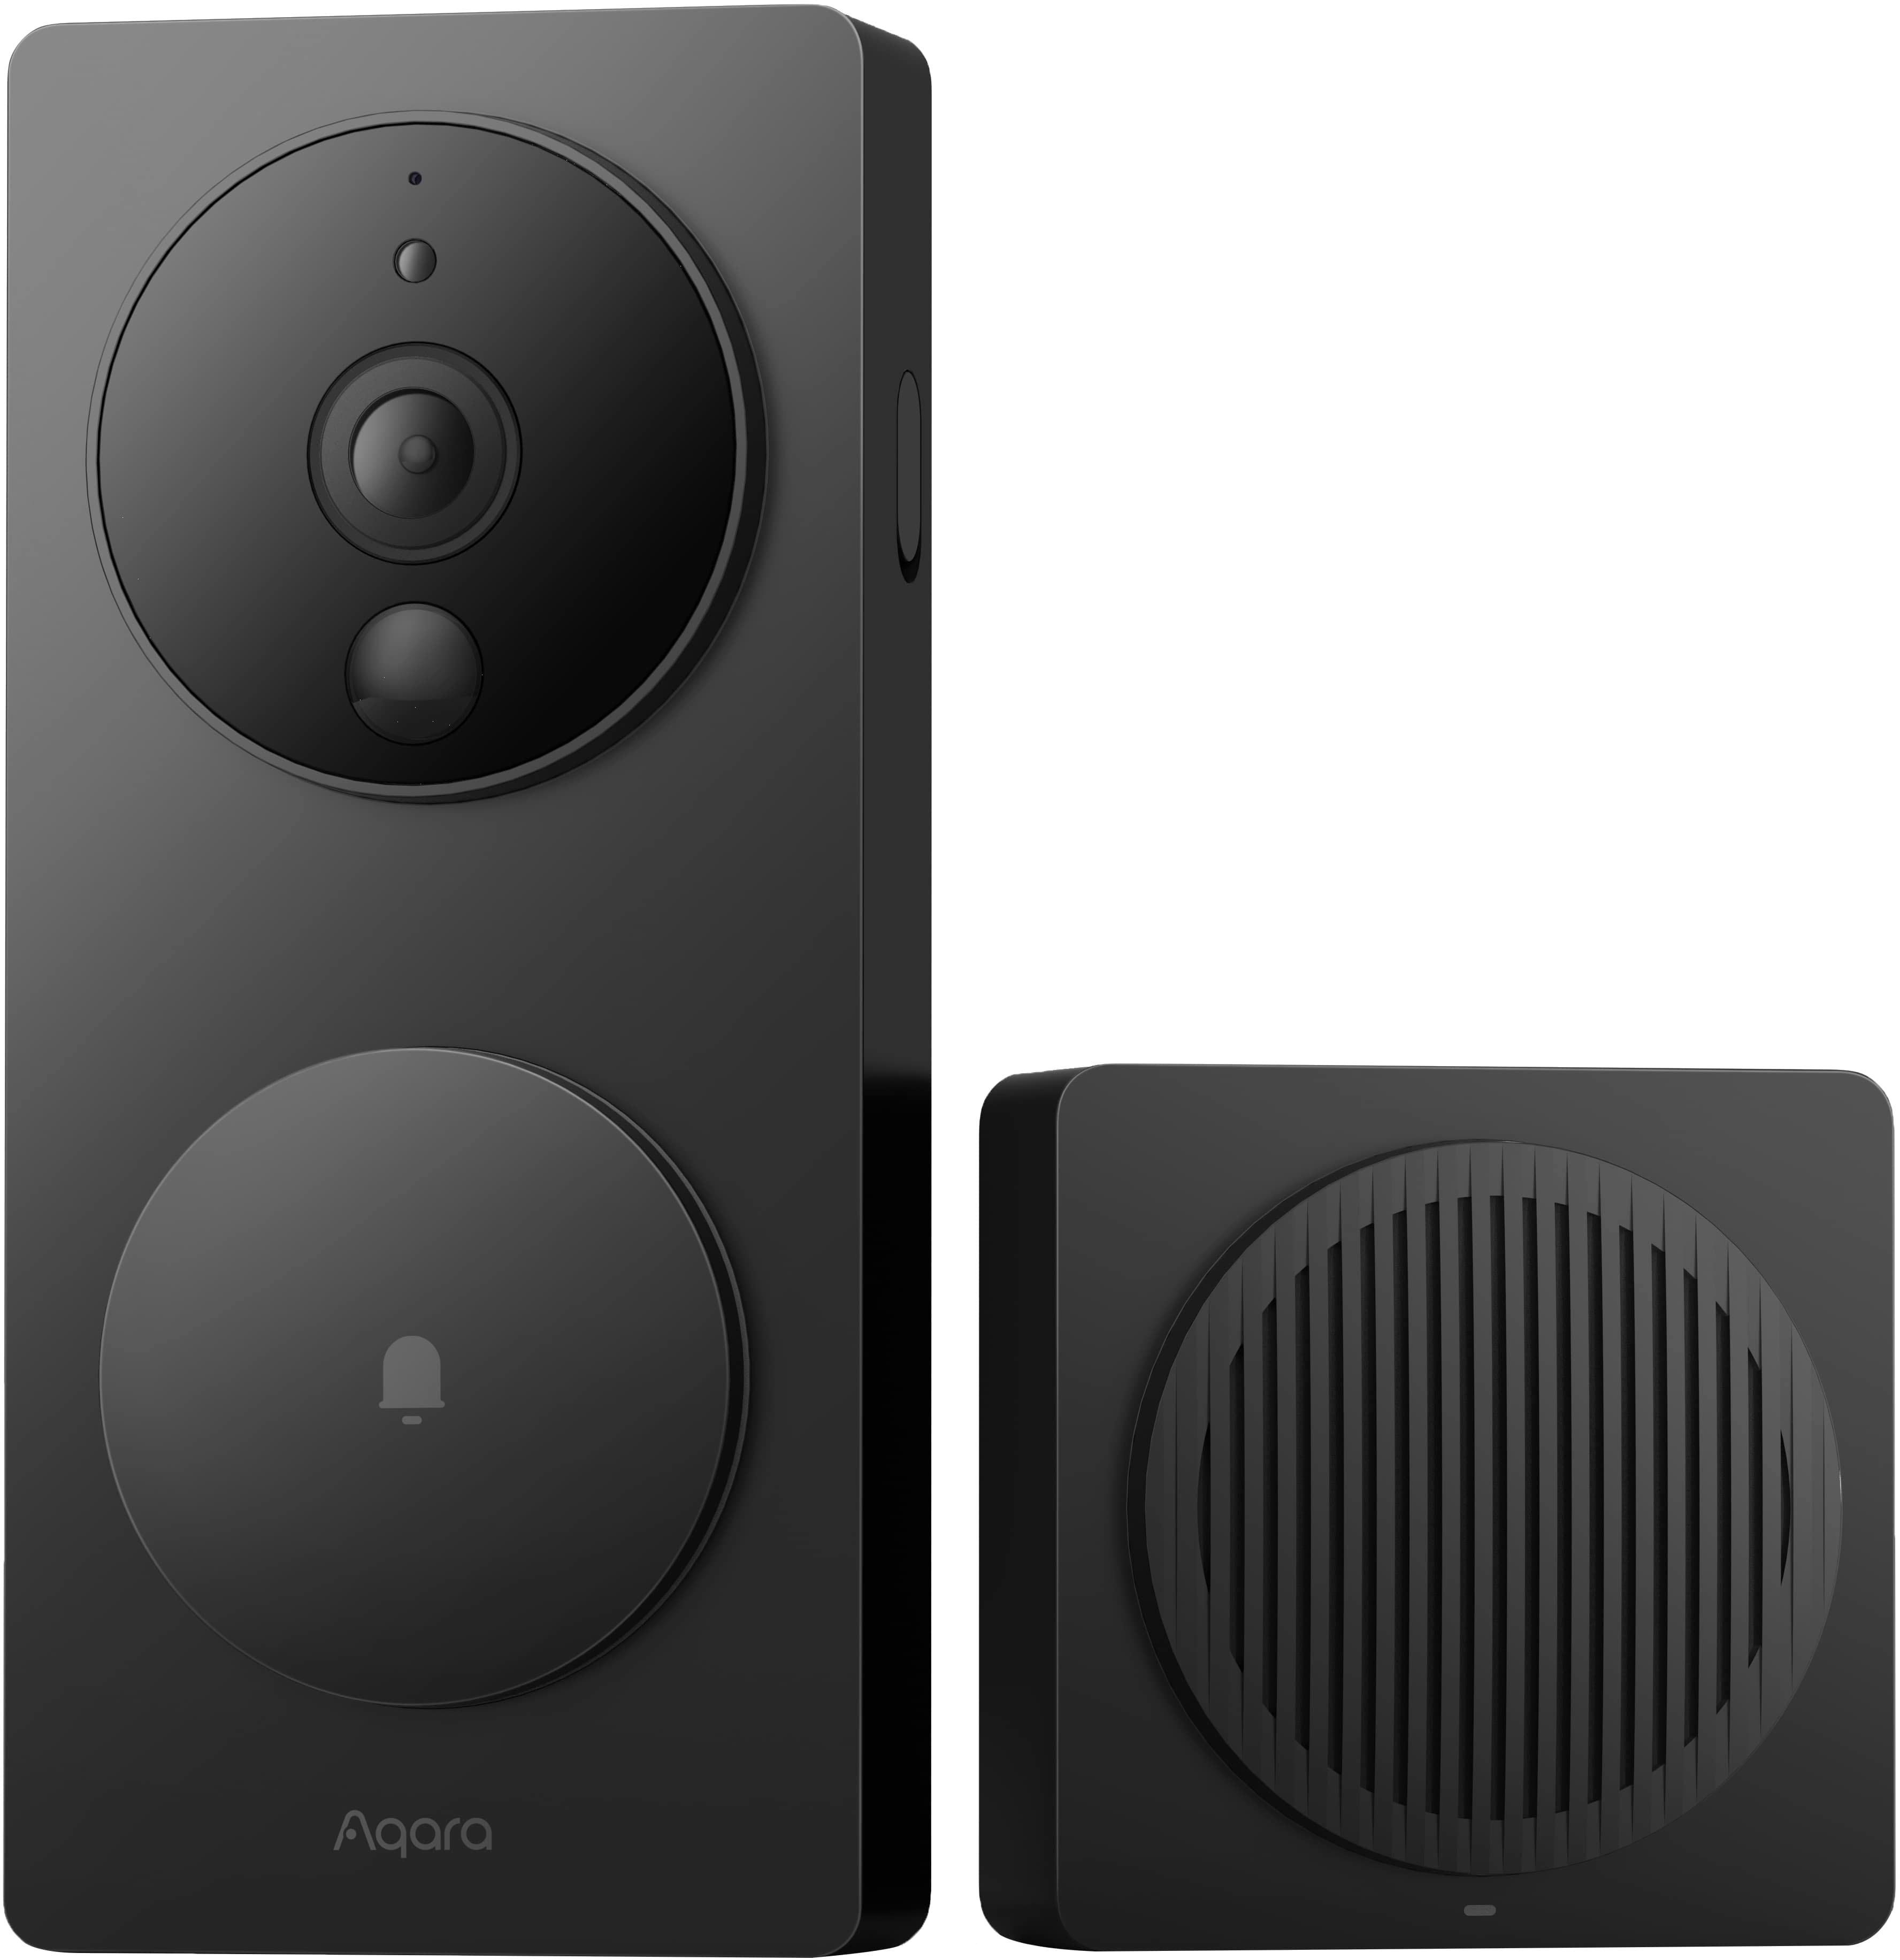 Angle View: Kwikset - Halo Smart Lock Wi-Fi Replacement Deadbolt with App/Touchscreen/Key Access - Matte Black